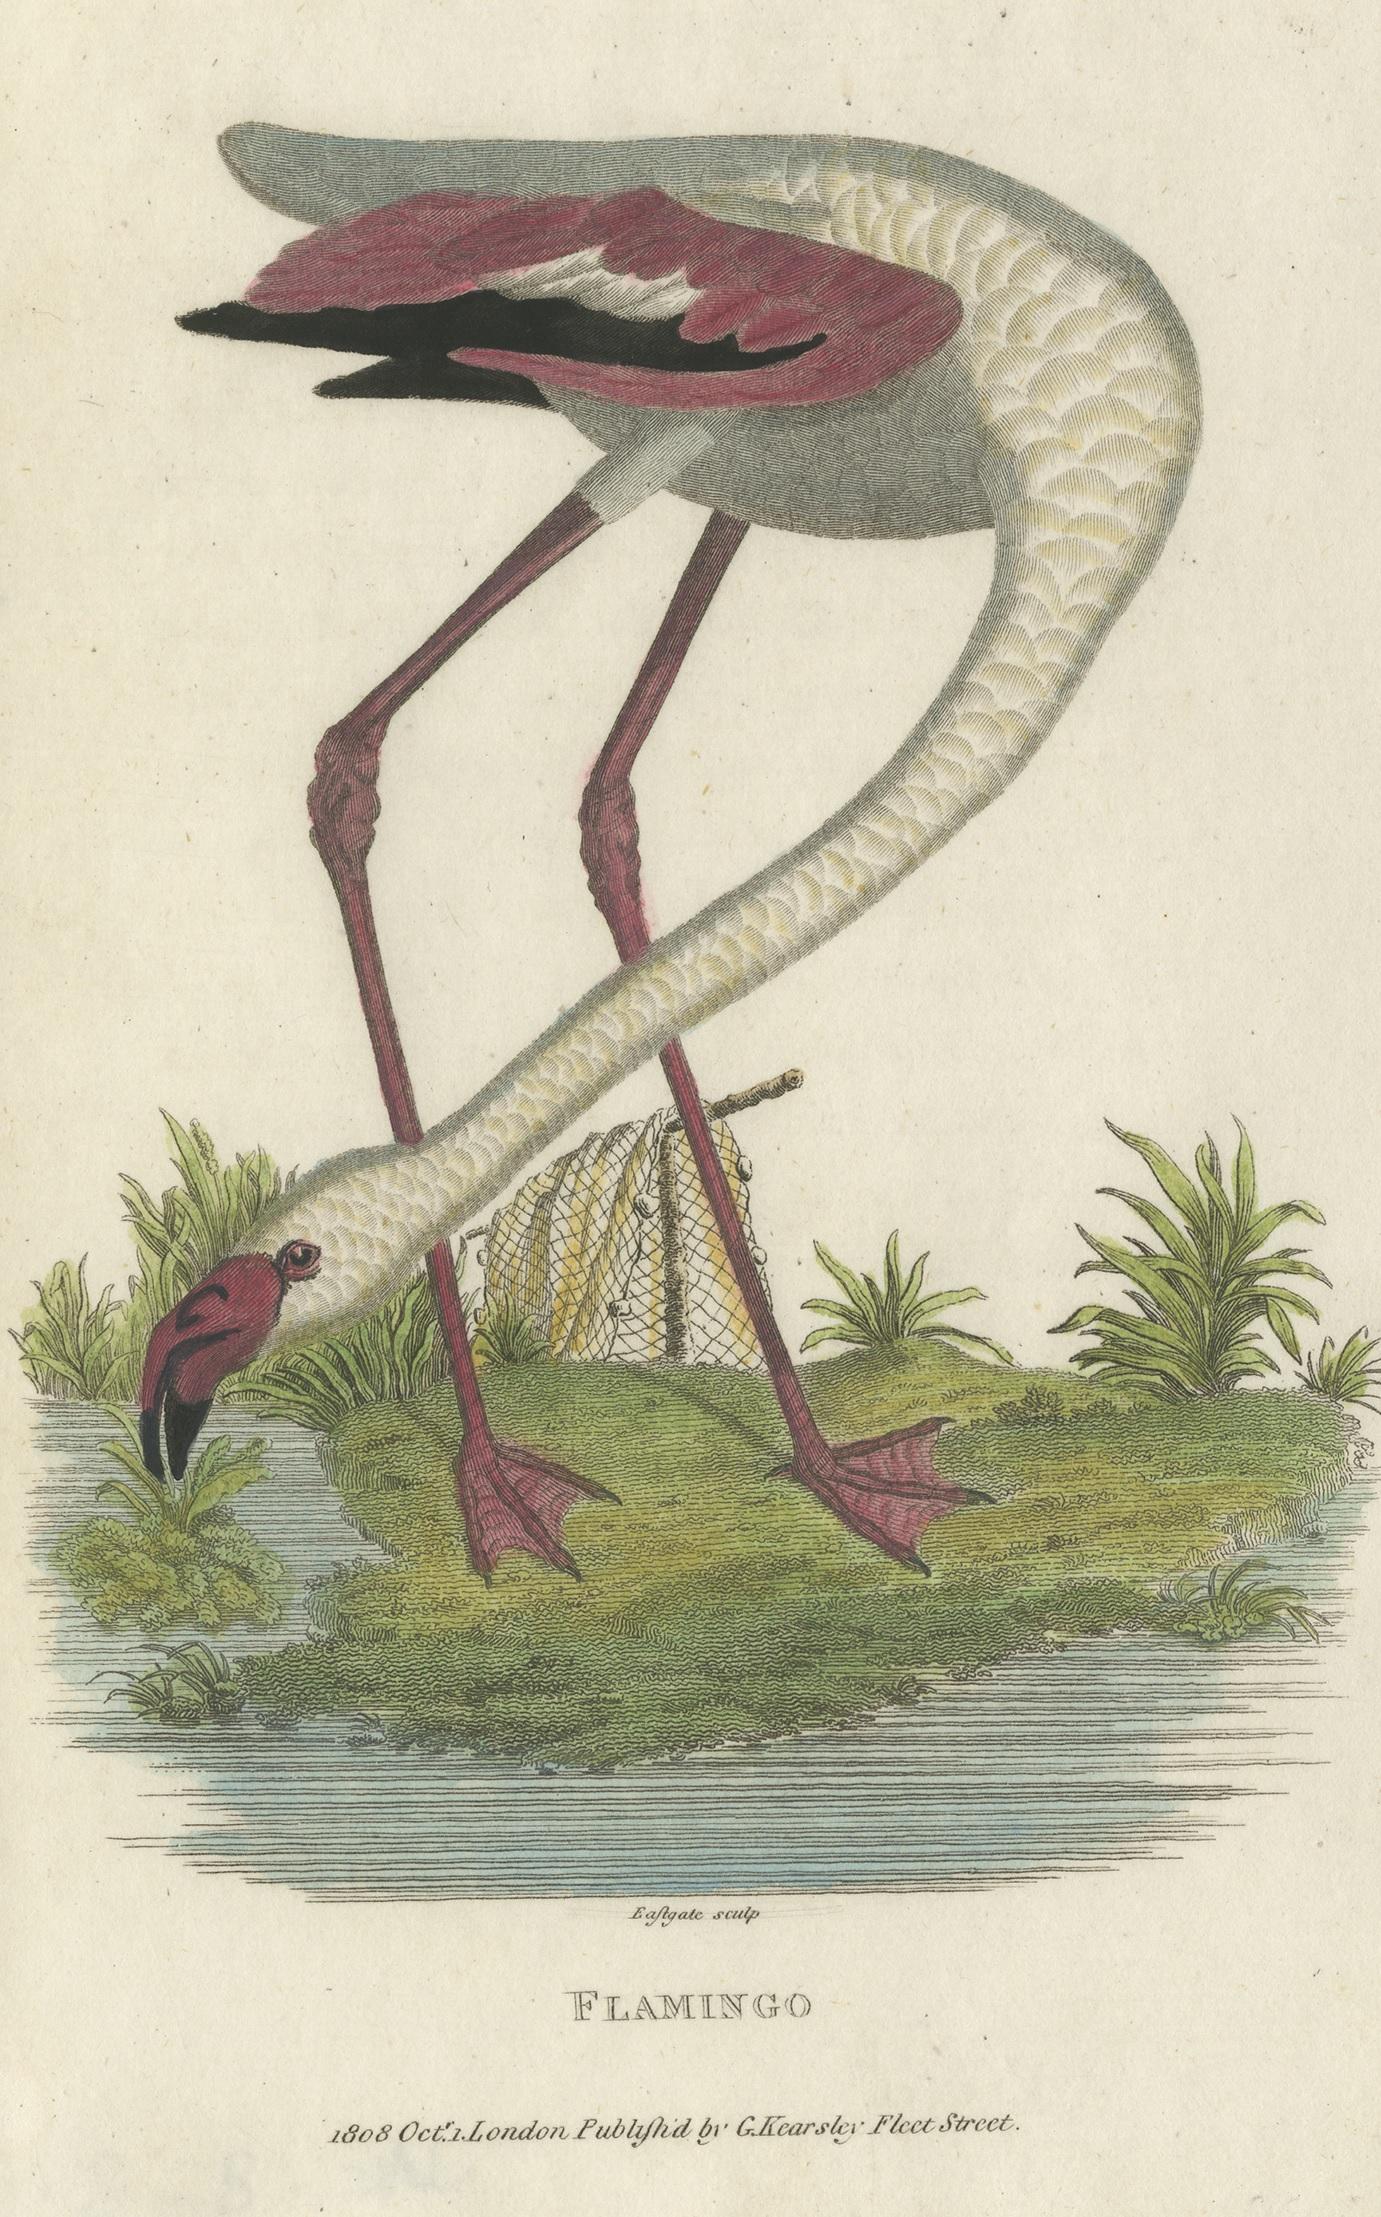 Antique print titled 'Flamingo'. Small hand colored engraving of a flamingo. This print originates from 'Zoological Lectures Delivered at the Royal Institution' by George Shaw, 1809. Published by G. Kearsley.